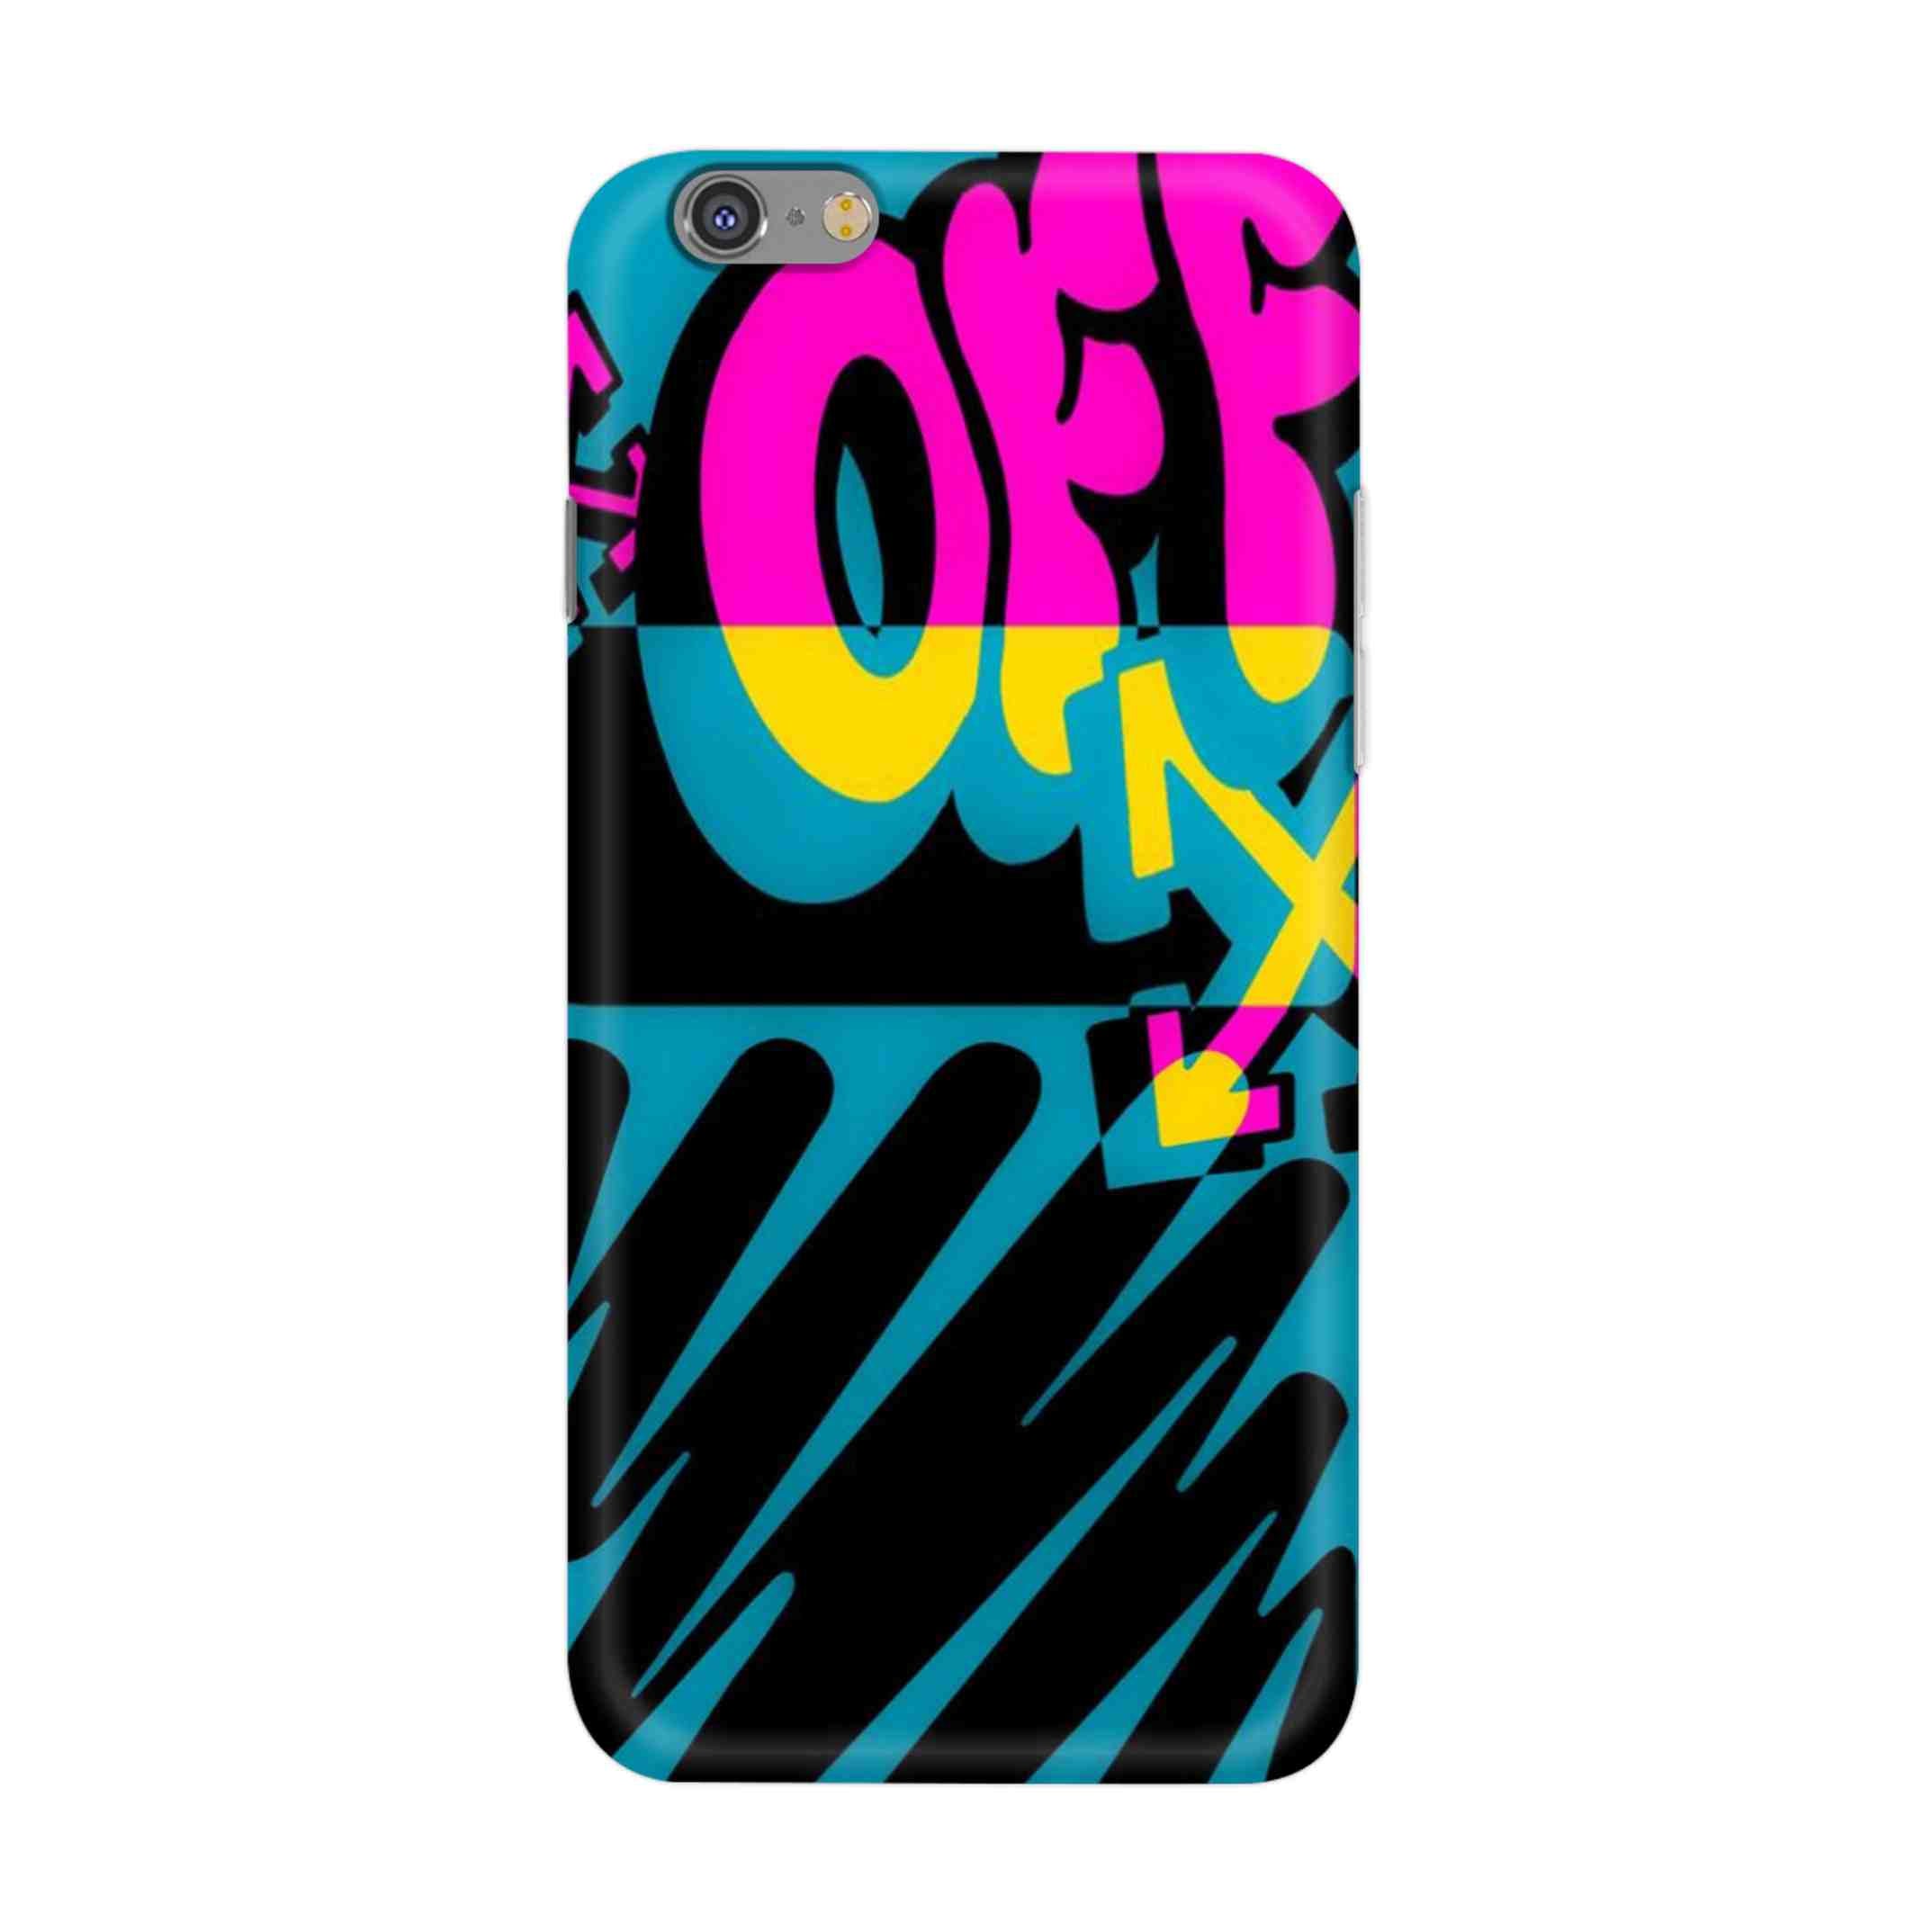 Buy Off Hard Back Mobile Phone Case/Cover For iPhone 6 / 6s Online